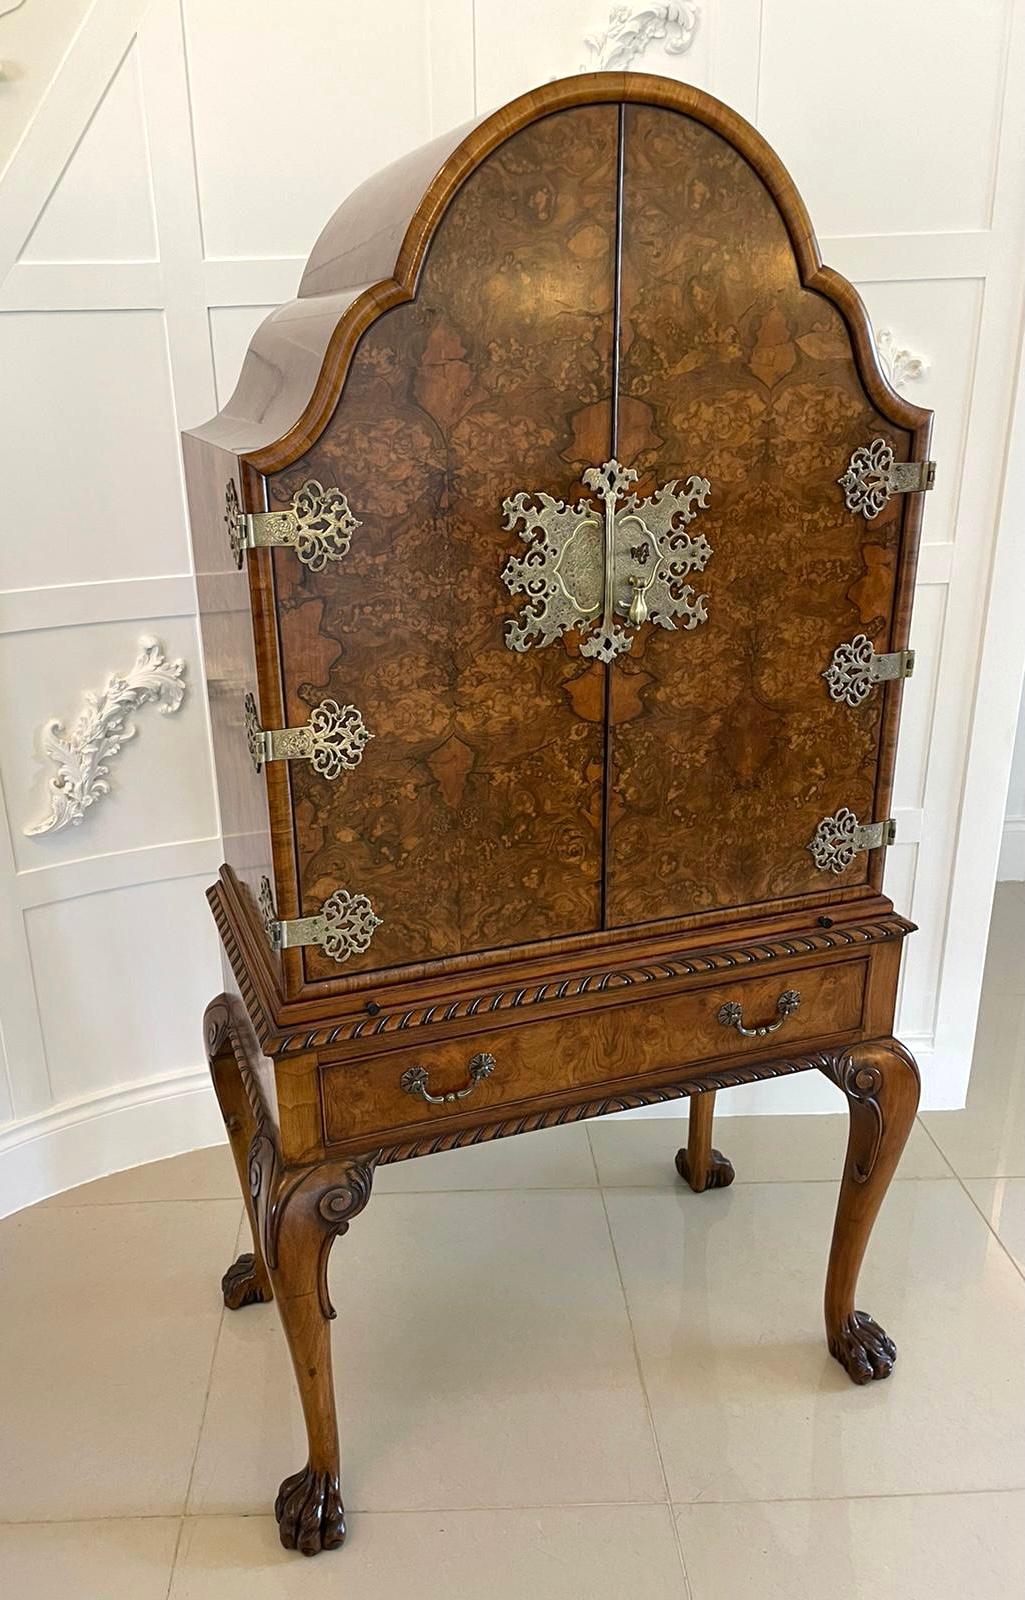 Superb quality antique burr walnut drinks cabinet having a superb quality burr walnut shaped top above a pair of burr walnut shaped doors with original brass hinges and lock plate opening to reveal a fitted interior consisting of a sliding celleret,